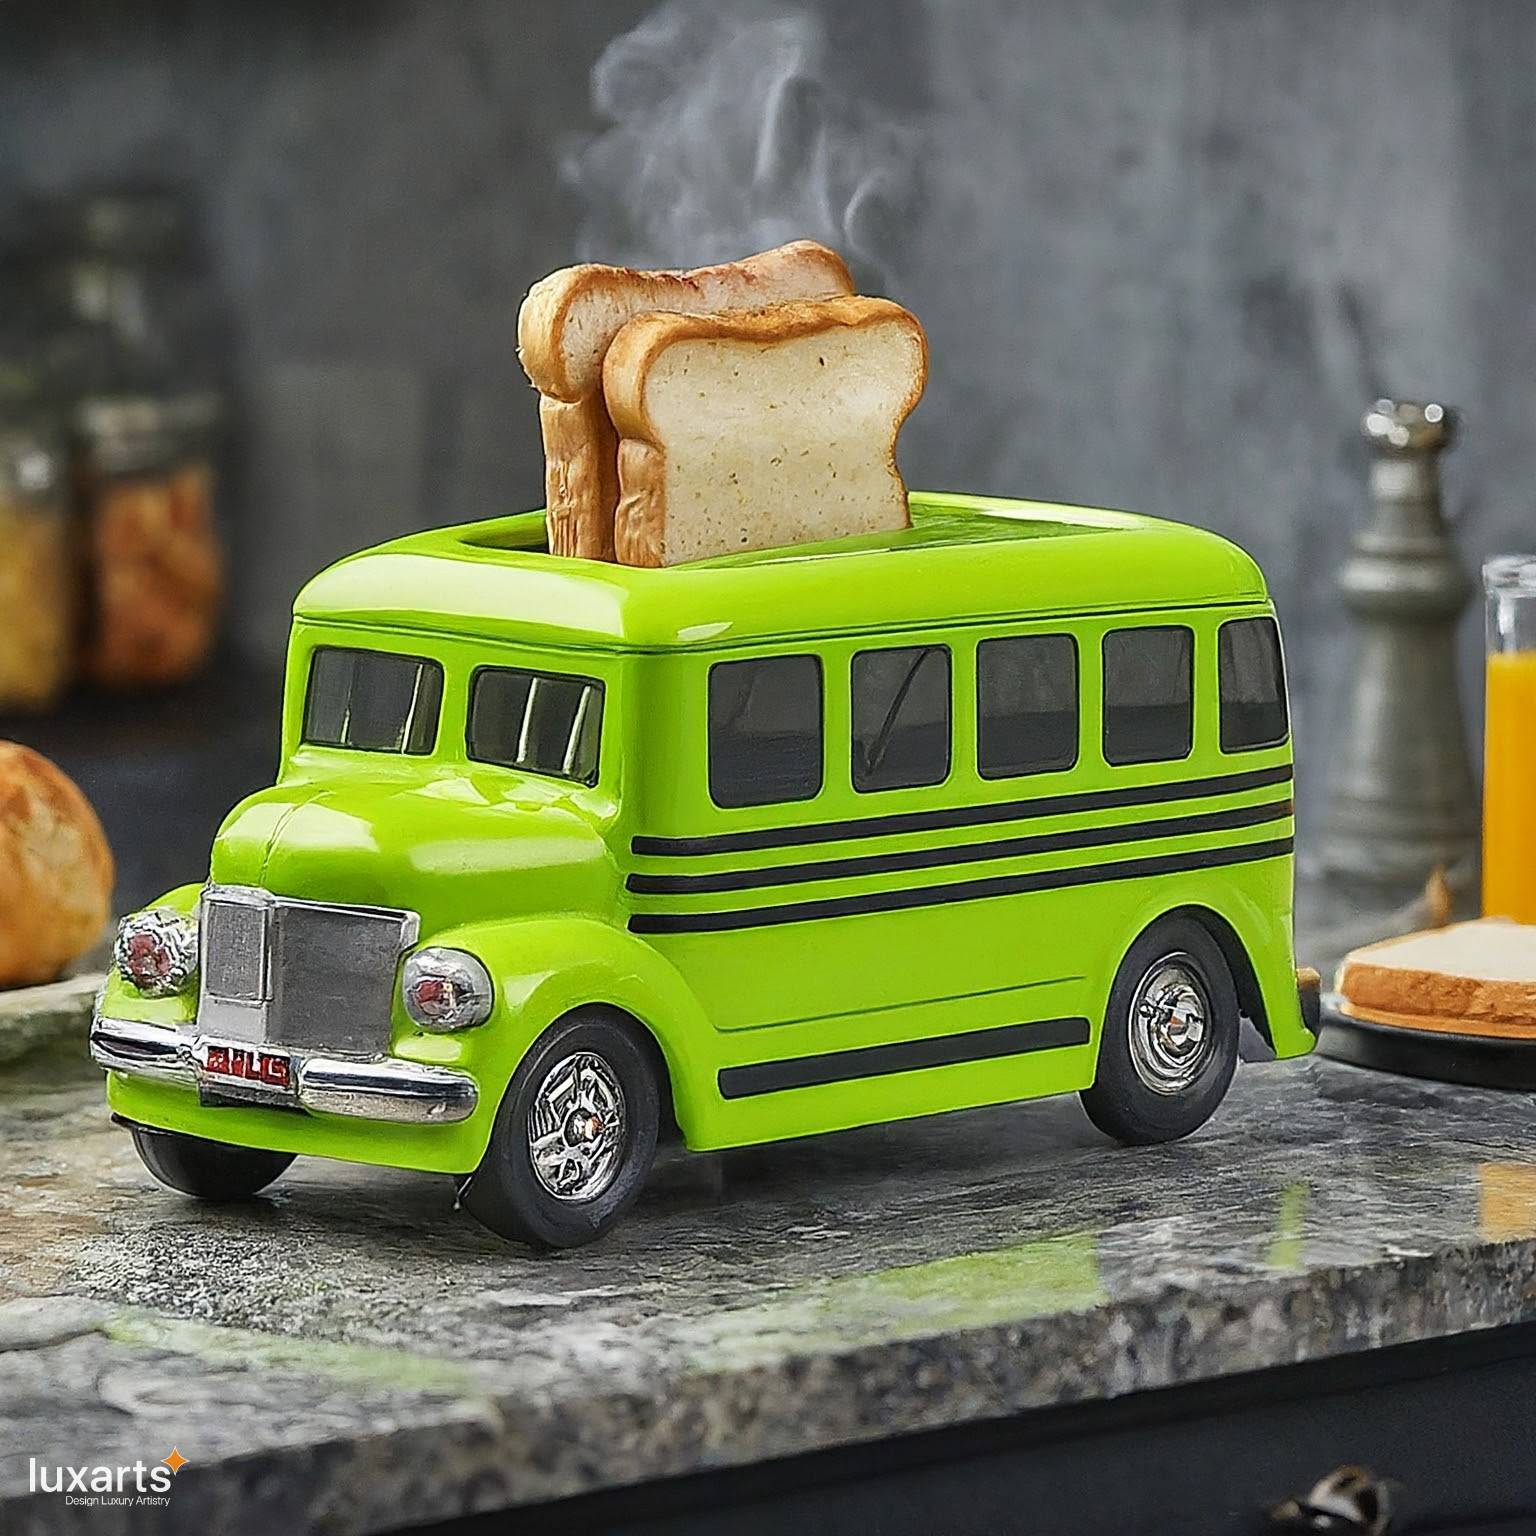 School Bus Shaped Toaster: Adding Fun to Breakfast Time luxarts school bus toaster 7